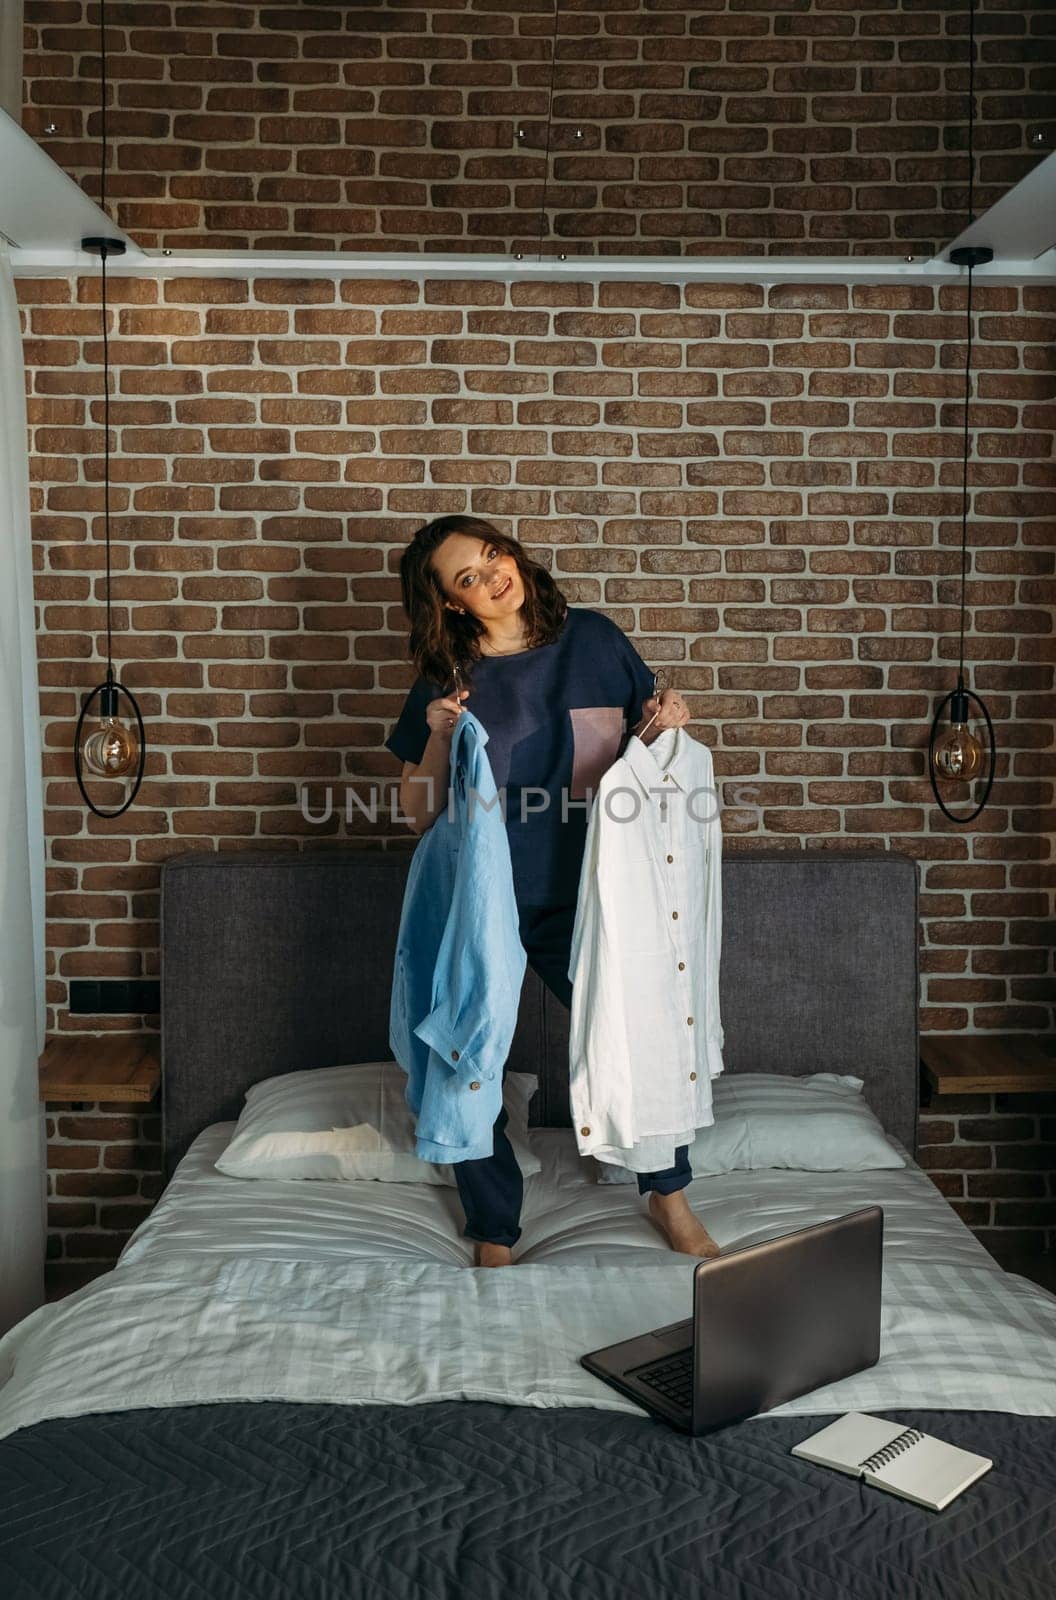 A beautiful woman in designer clothes stands on the bed and holds clothes bought online in her hands. Vertical frame.